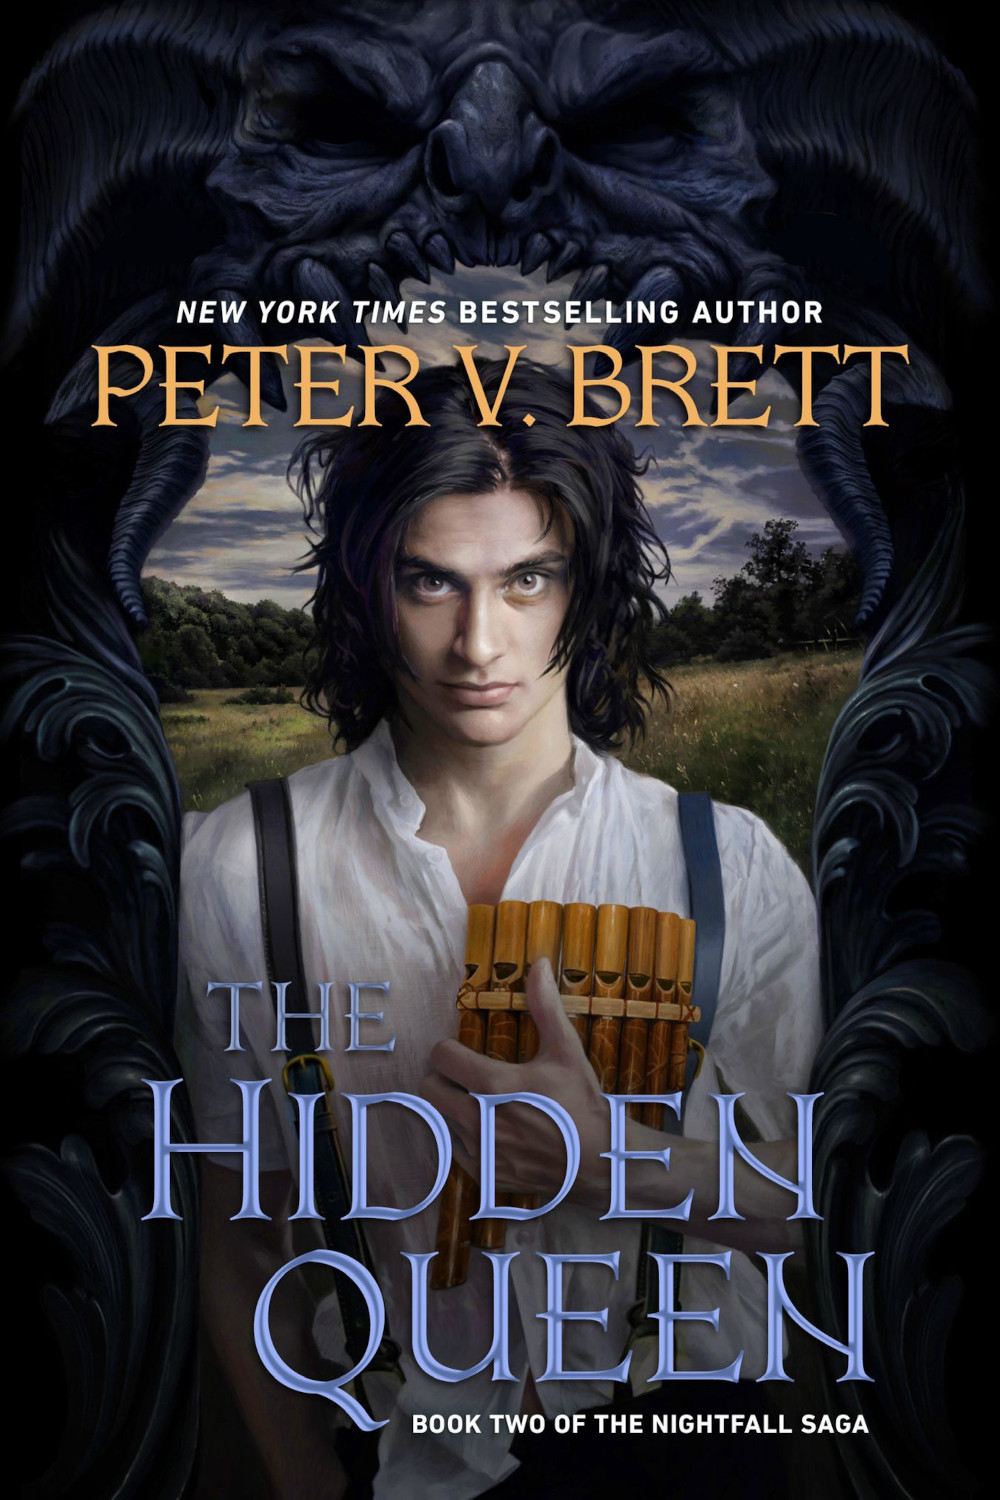 The Hidden Queen by Peter V. Brett, Book Two of The Nightfall Saga (US cover)